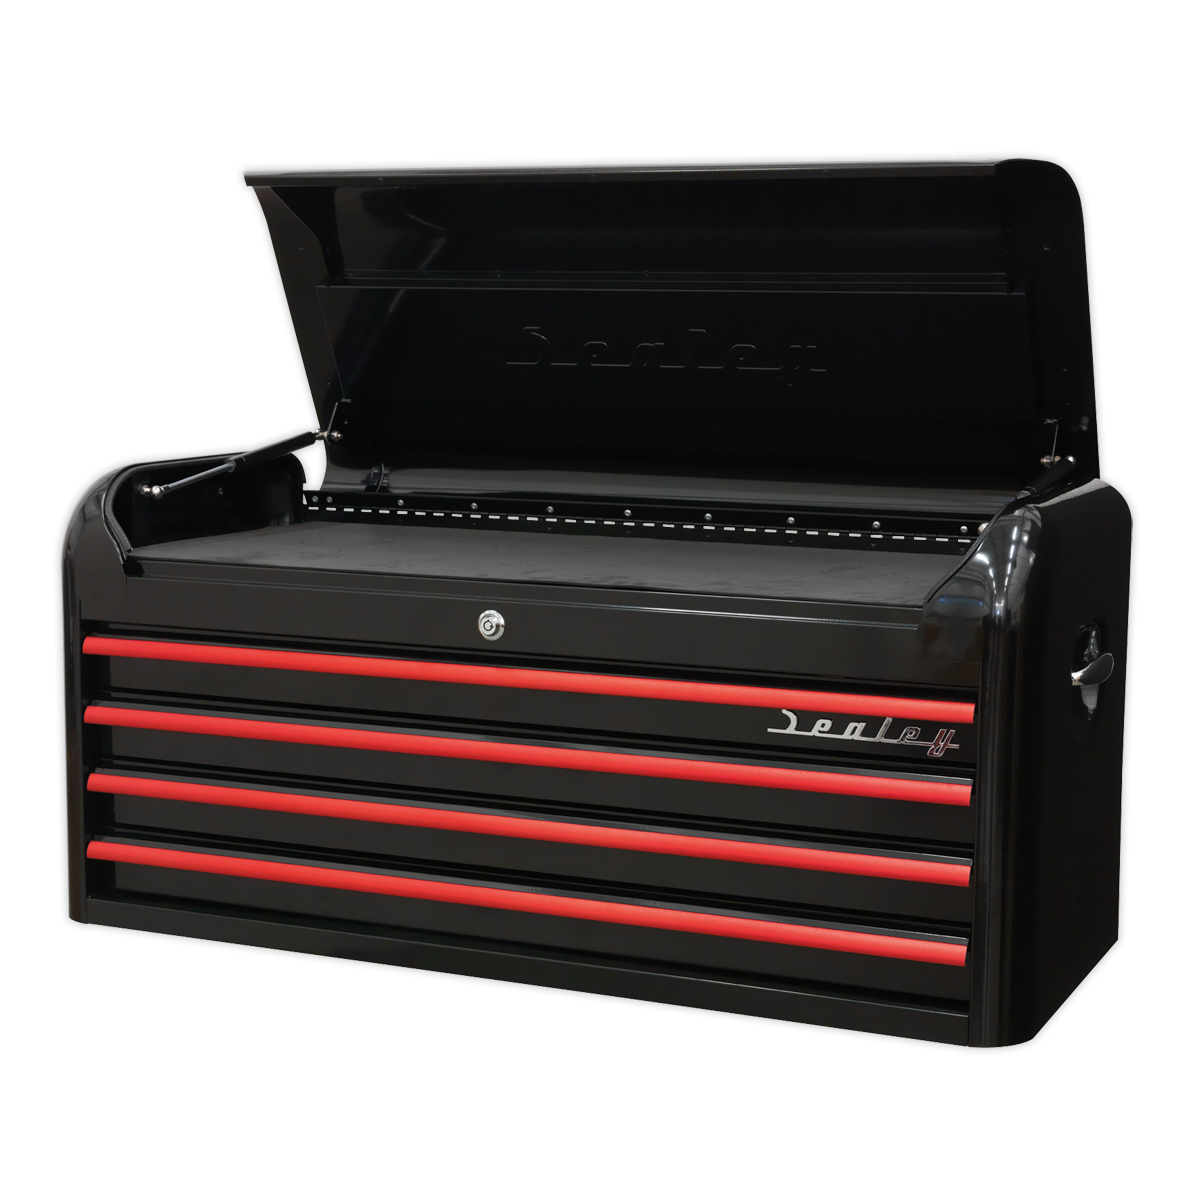 Topchest 4 Drawer Wide Retro Style - Black with Red Anodised Drawer Pulls - AP41104BR - Farming Parts